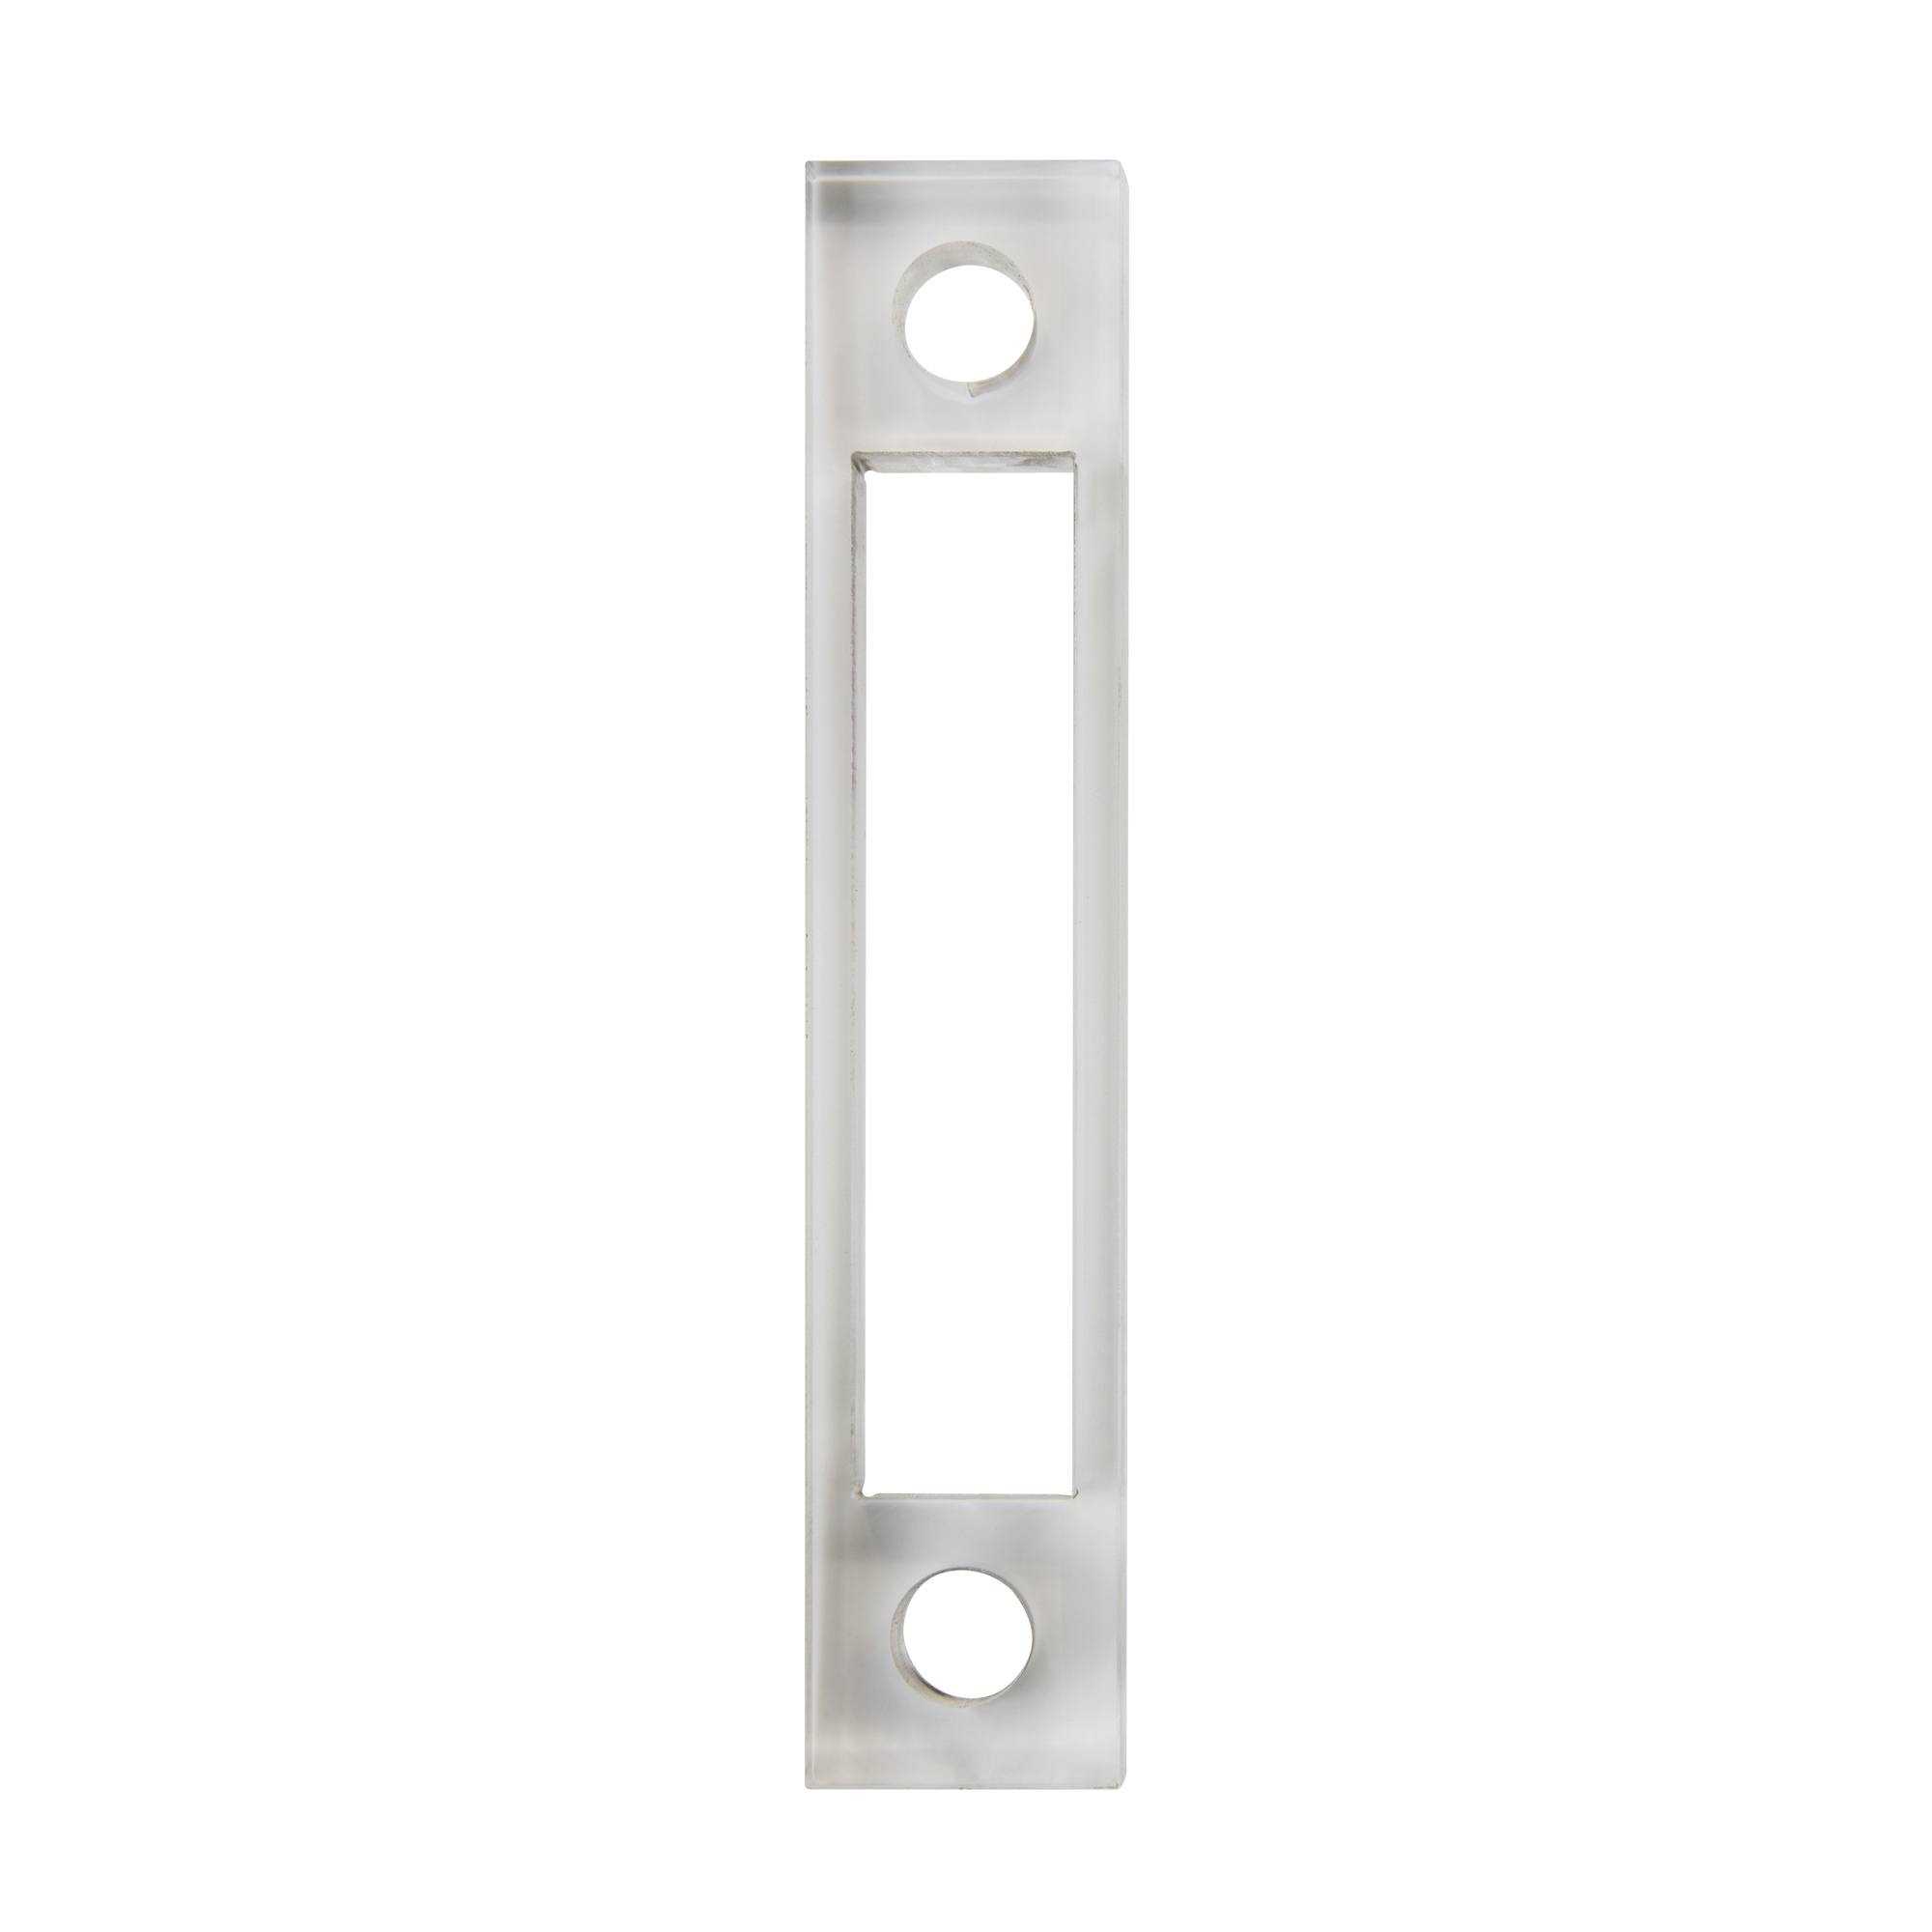 10mm Packer for 1215 Night Latch